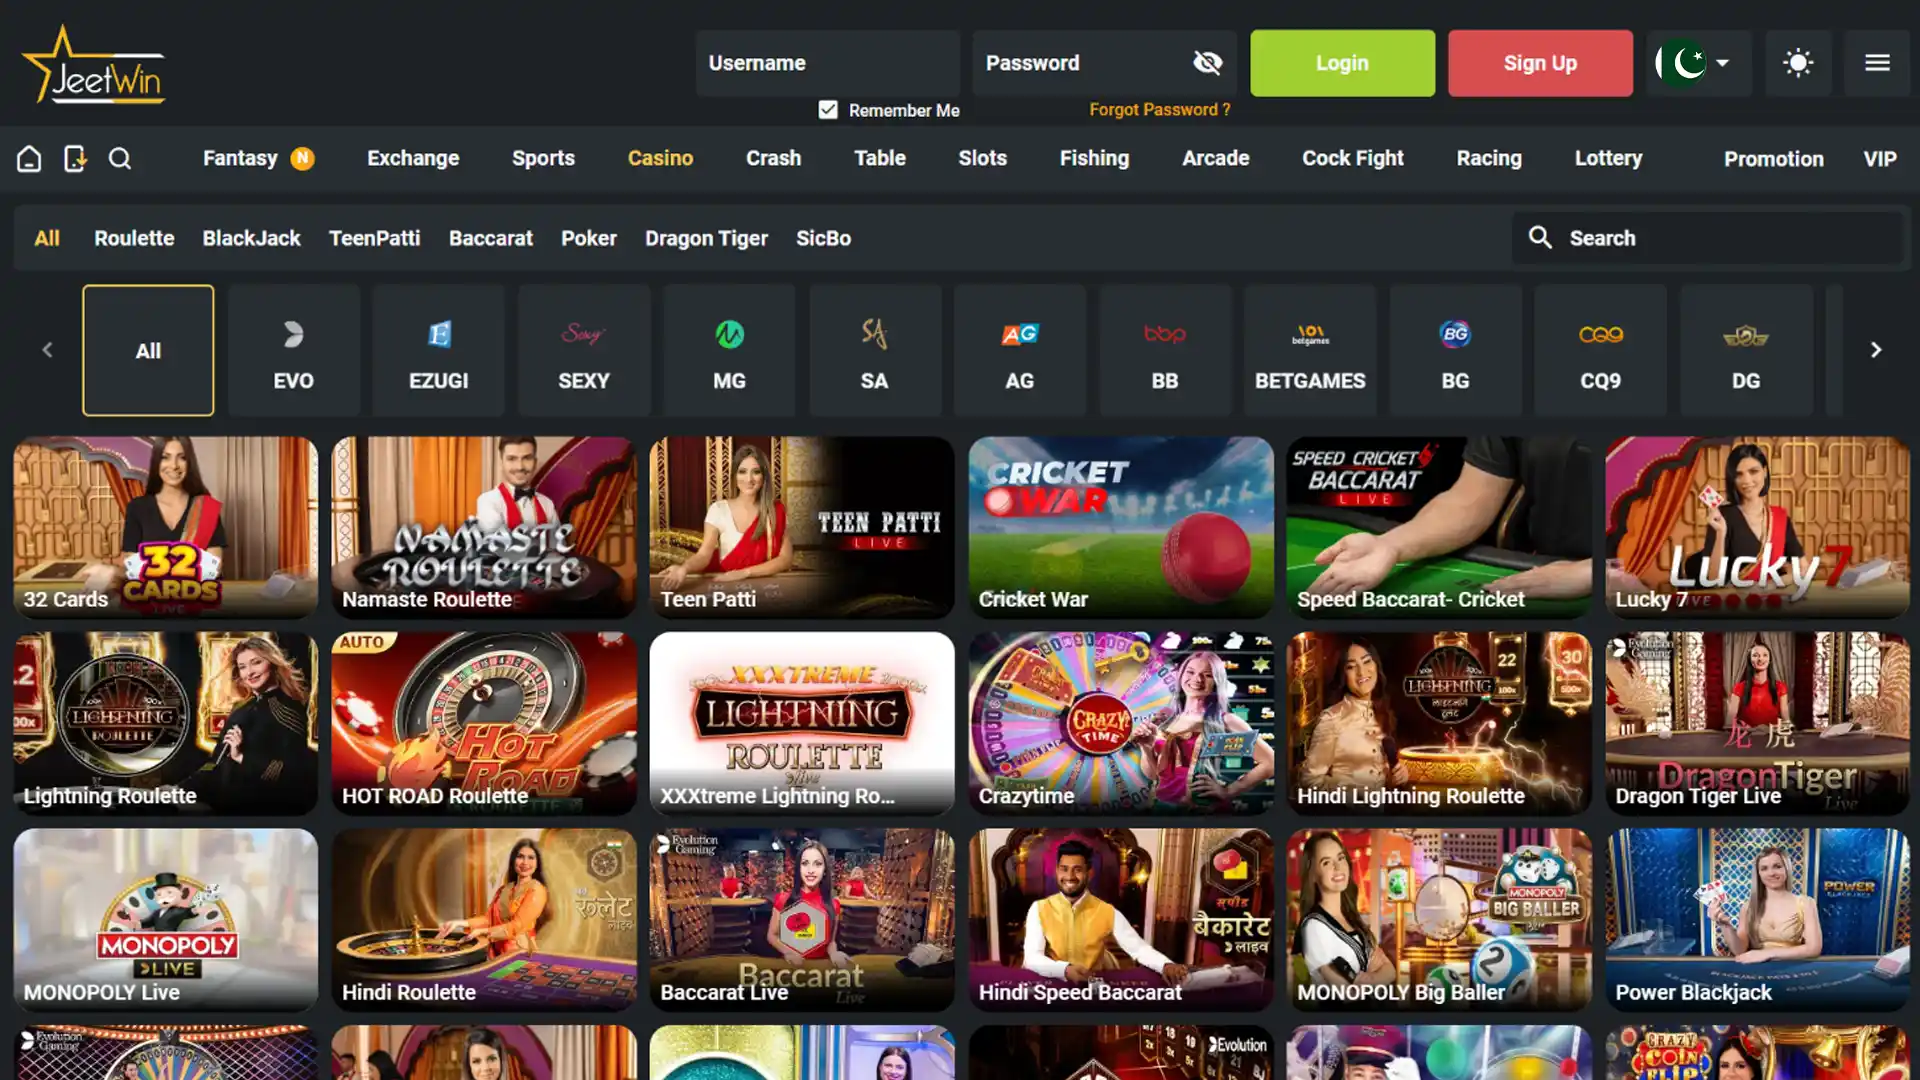 Play your favorite casino games with Jeetwin.